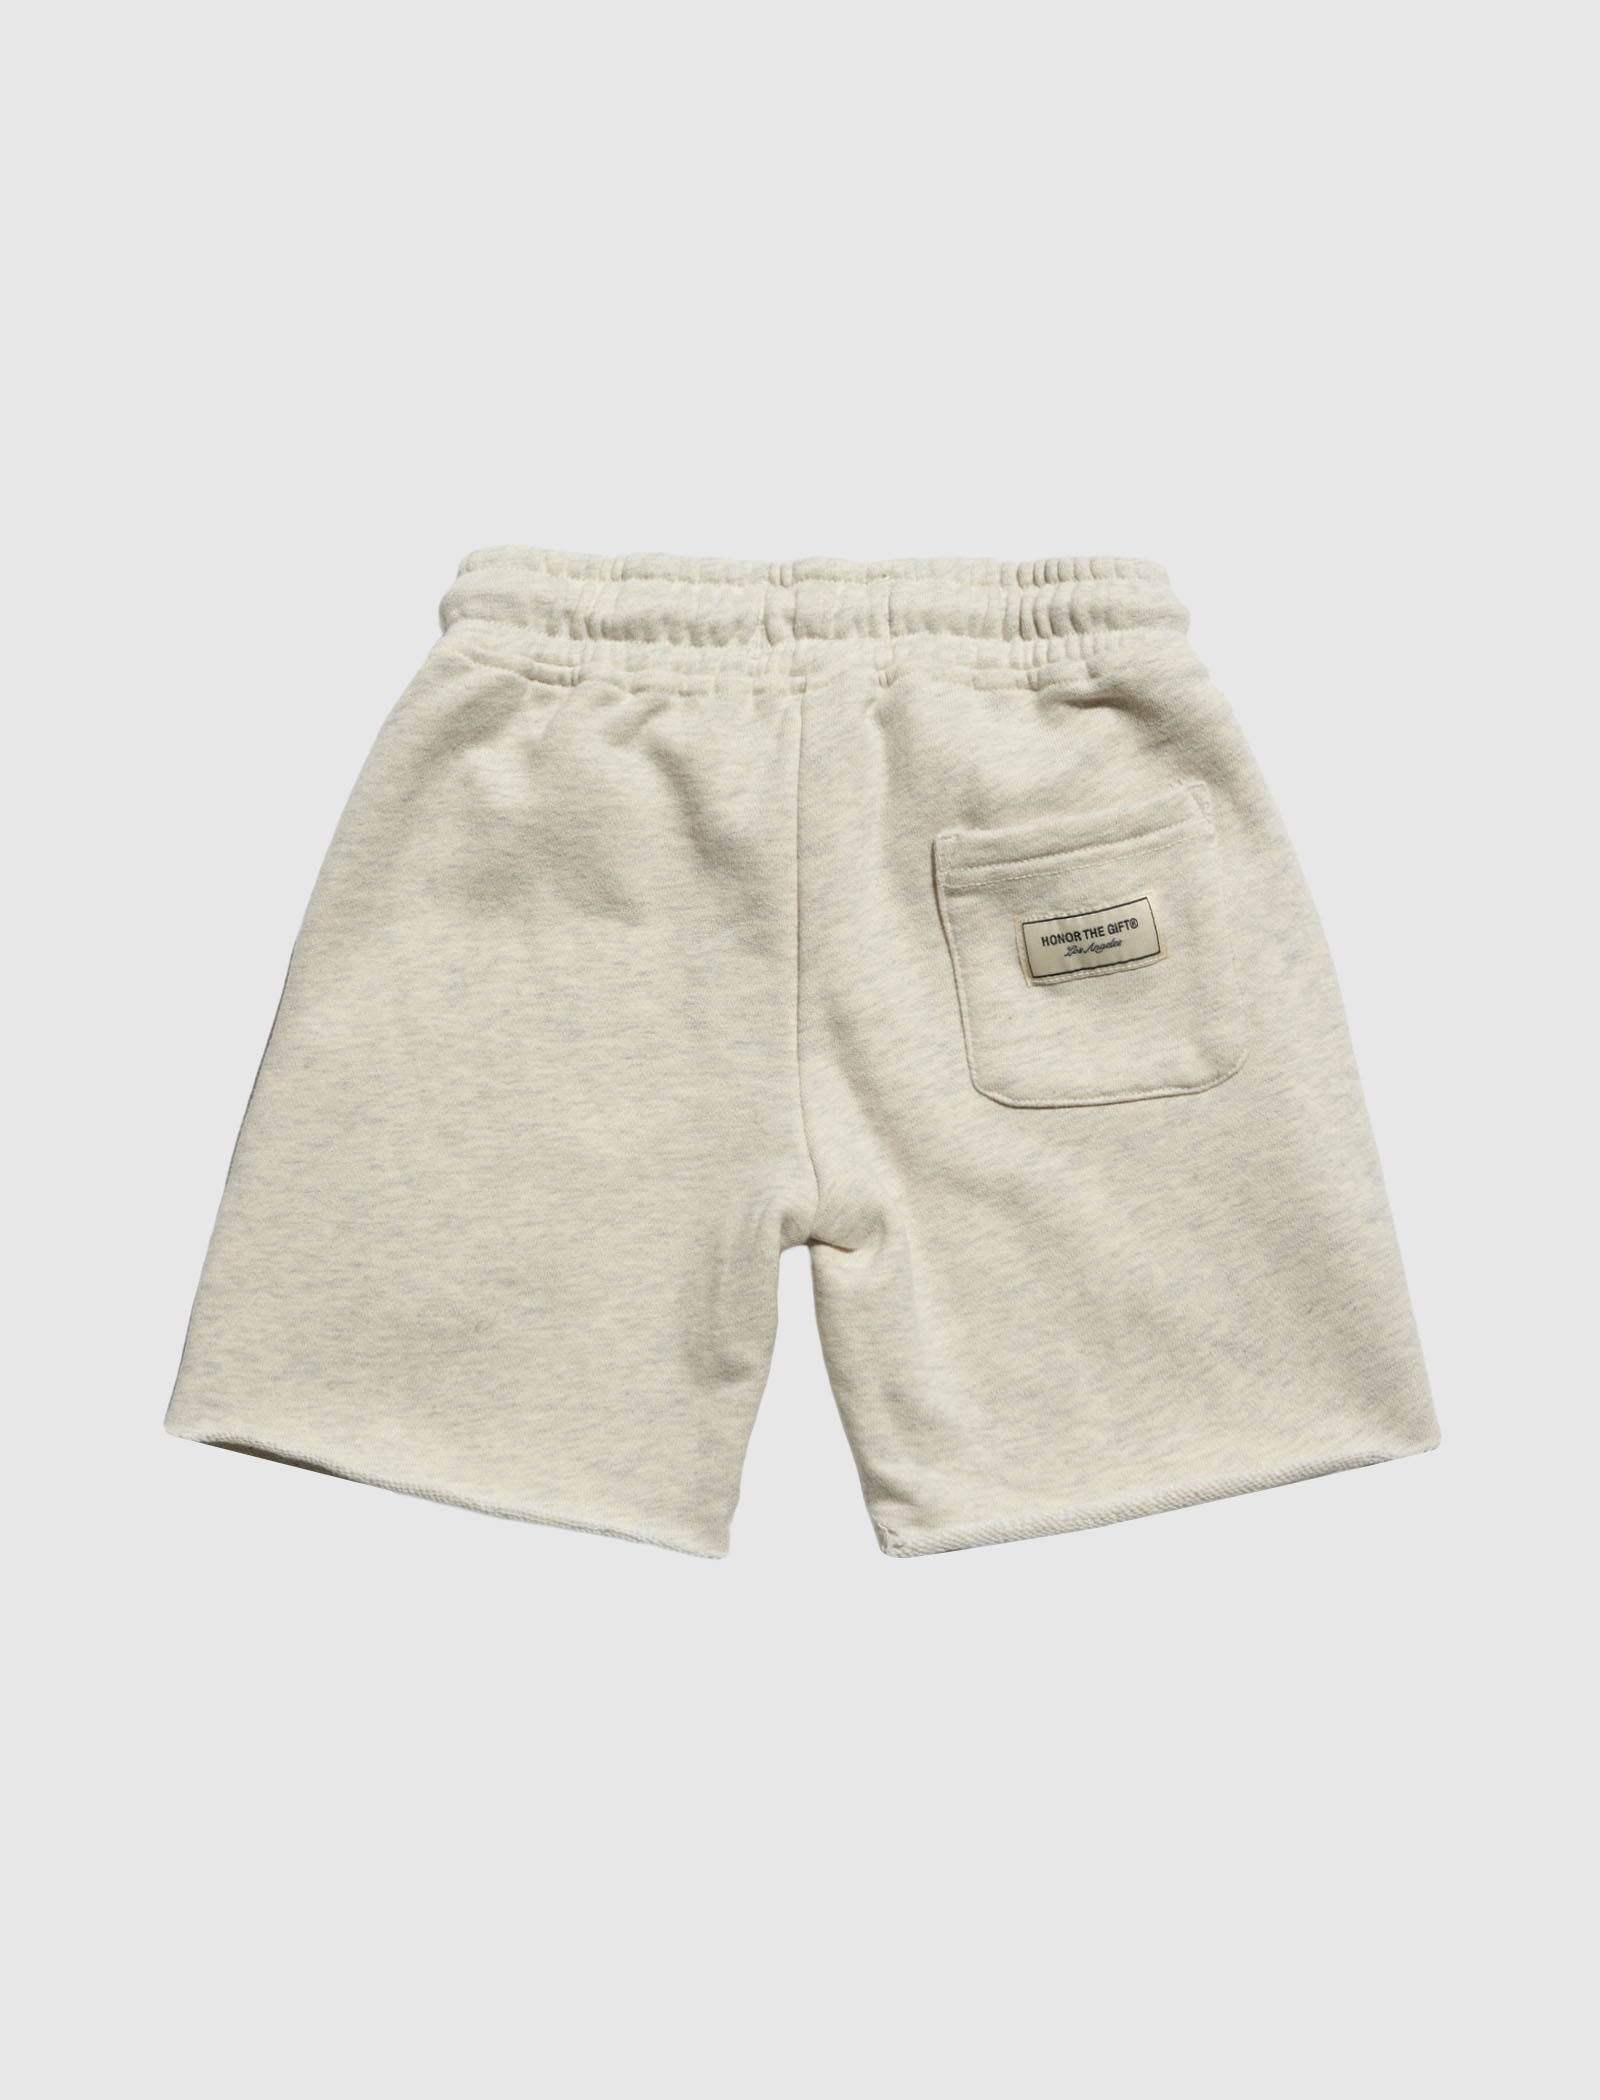 HONOR THE GIFT KIDS TERRY SHORTS